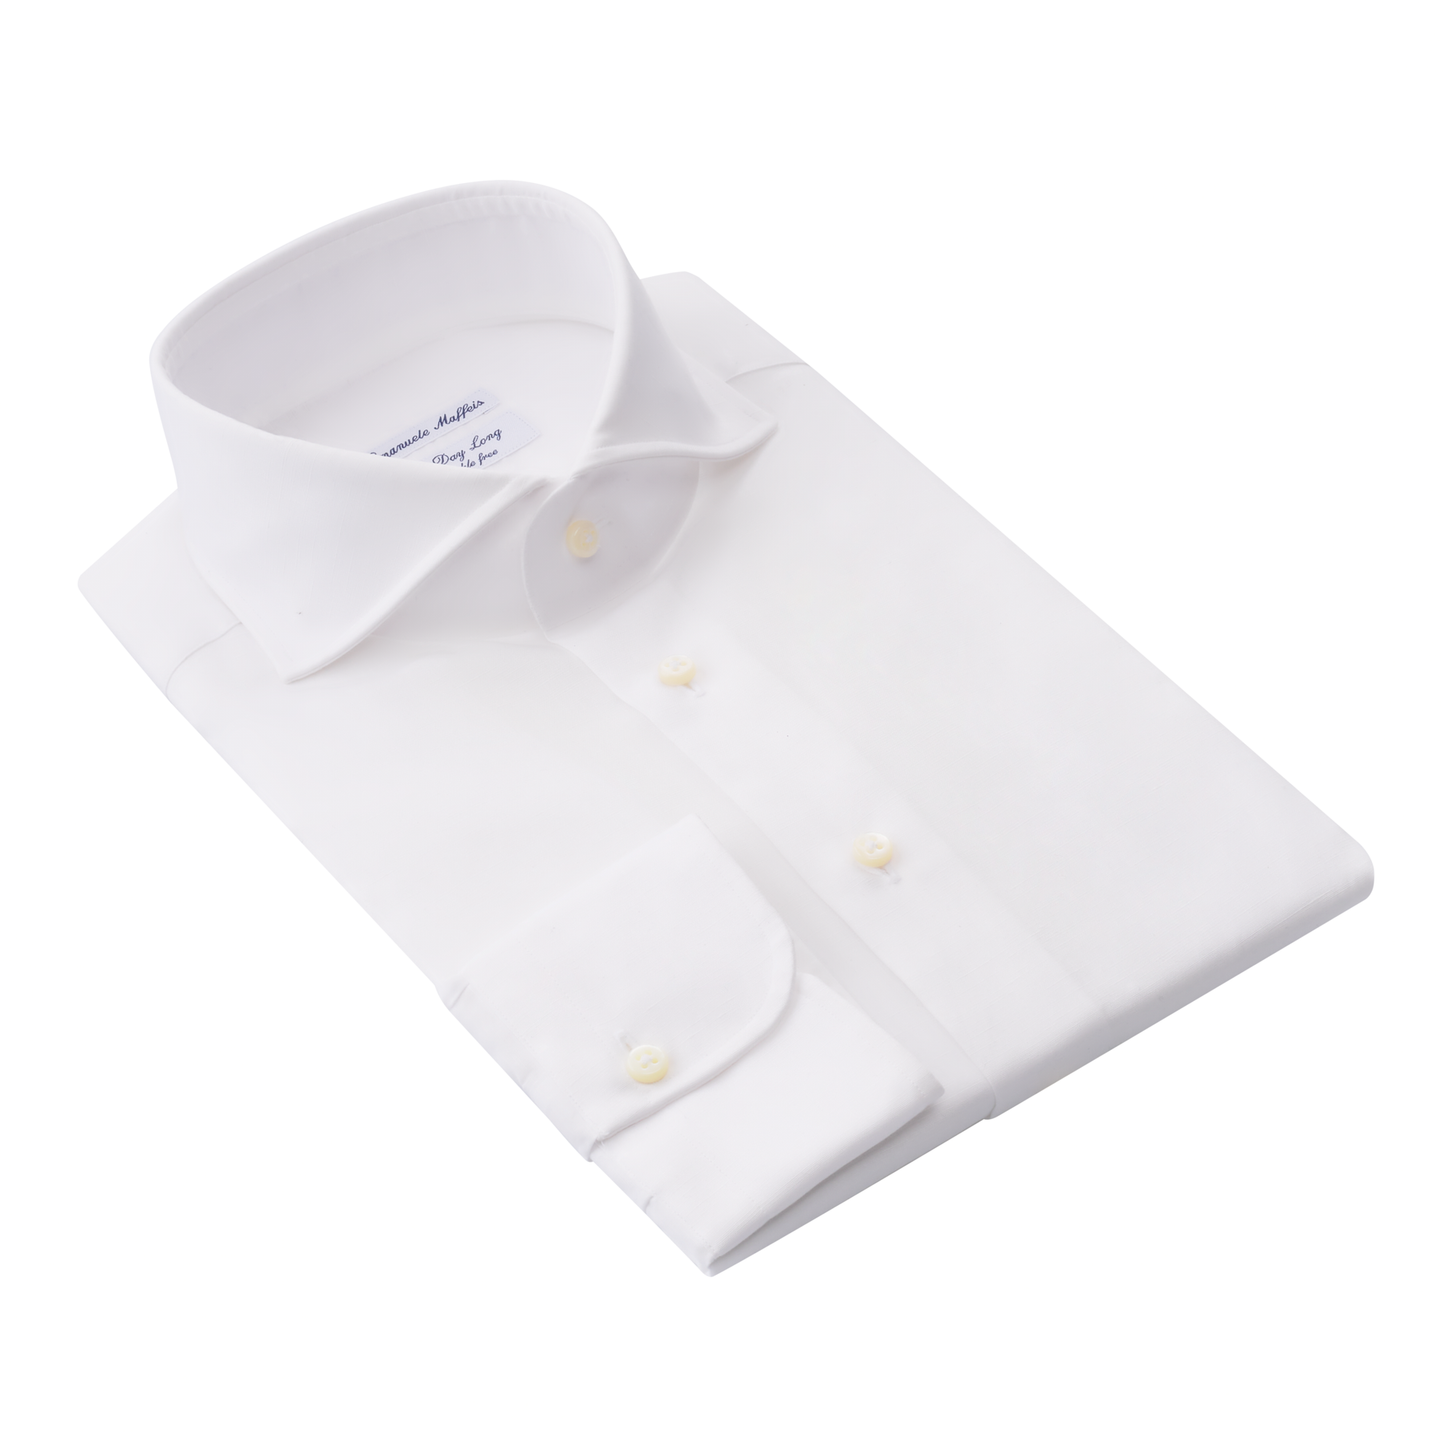 Emanuele Maffeis "All Day Long Collection" Linen and Cotton-Blend White Shirt - SARTALE